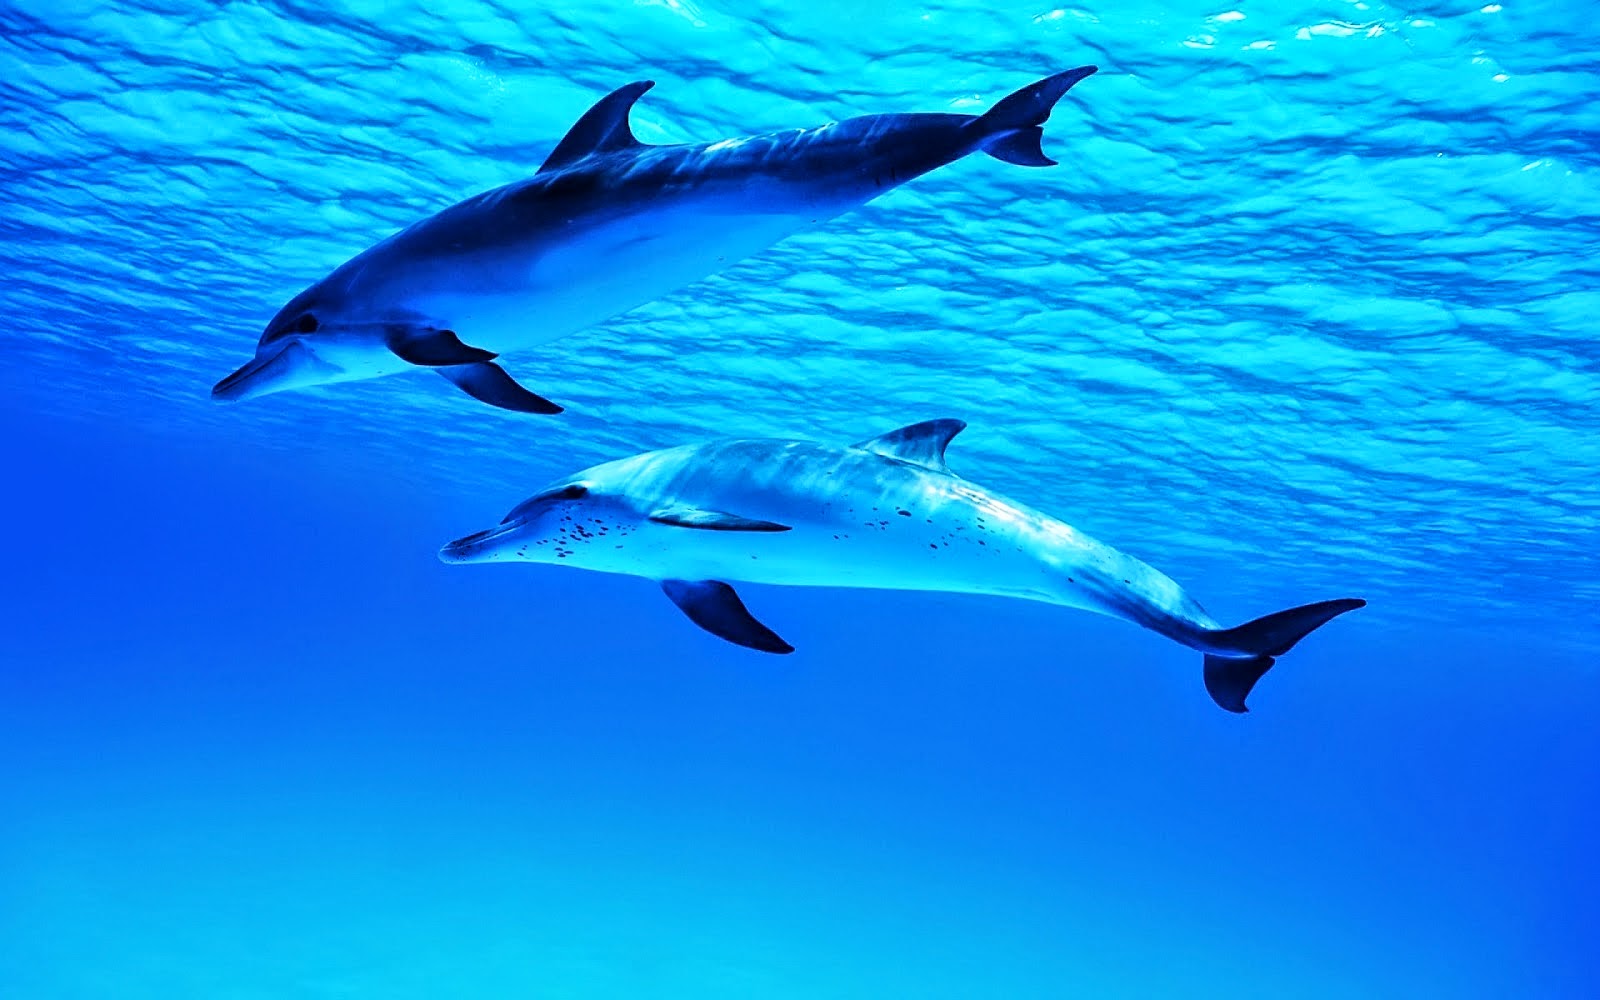 Download and examine dolphin hd wallpapers wallpapers for the desktop or mo...